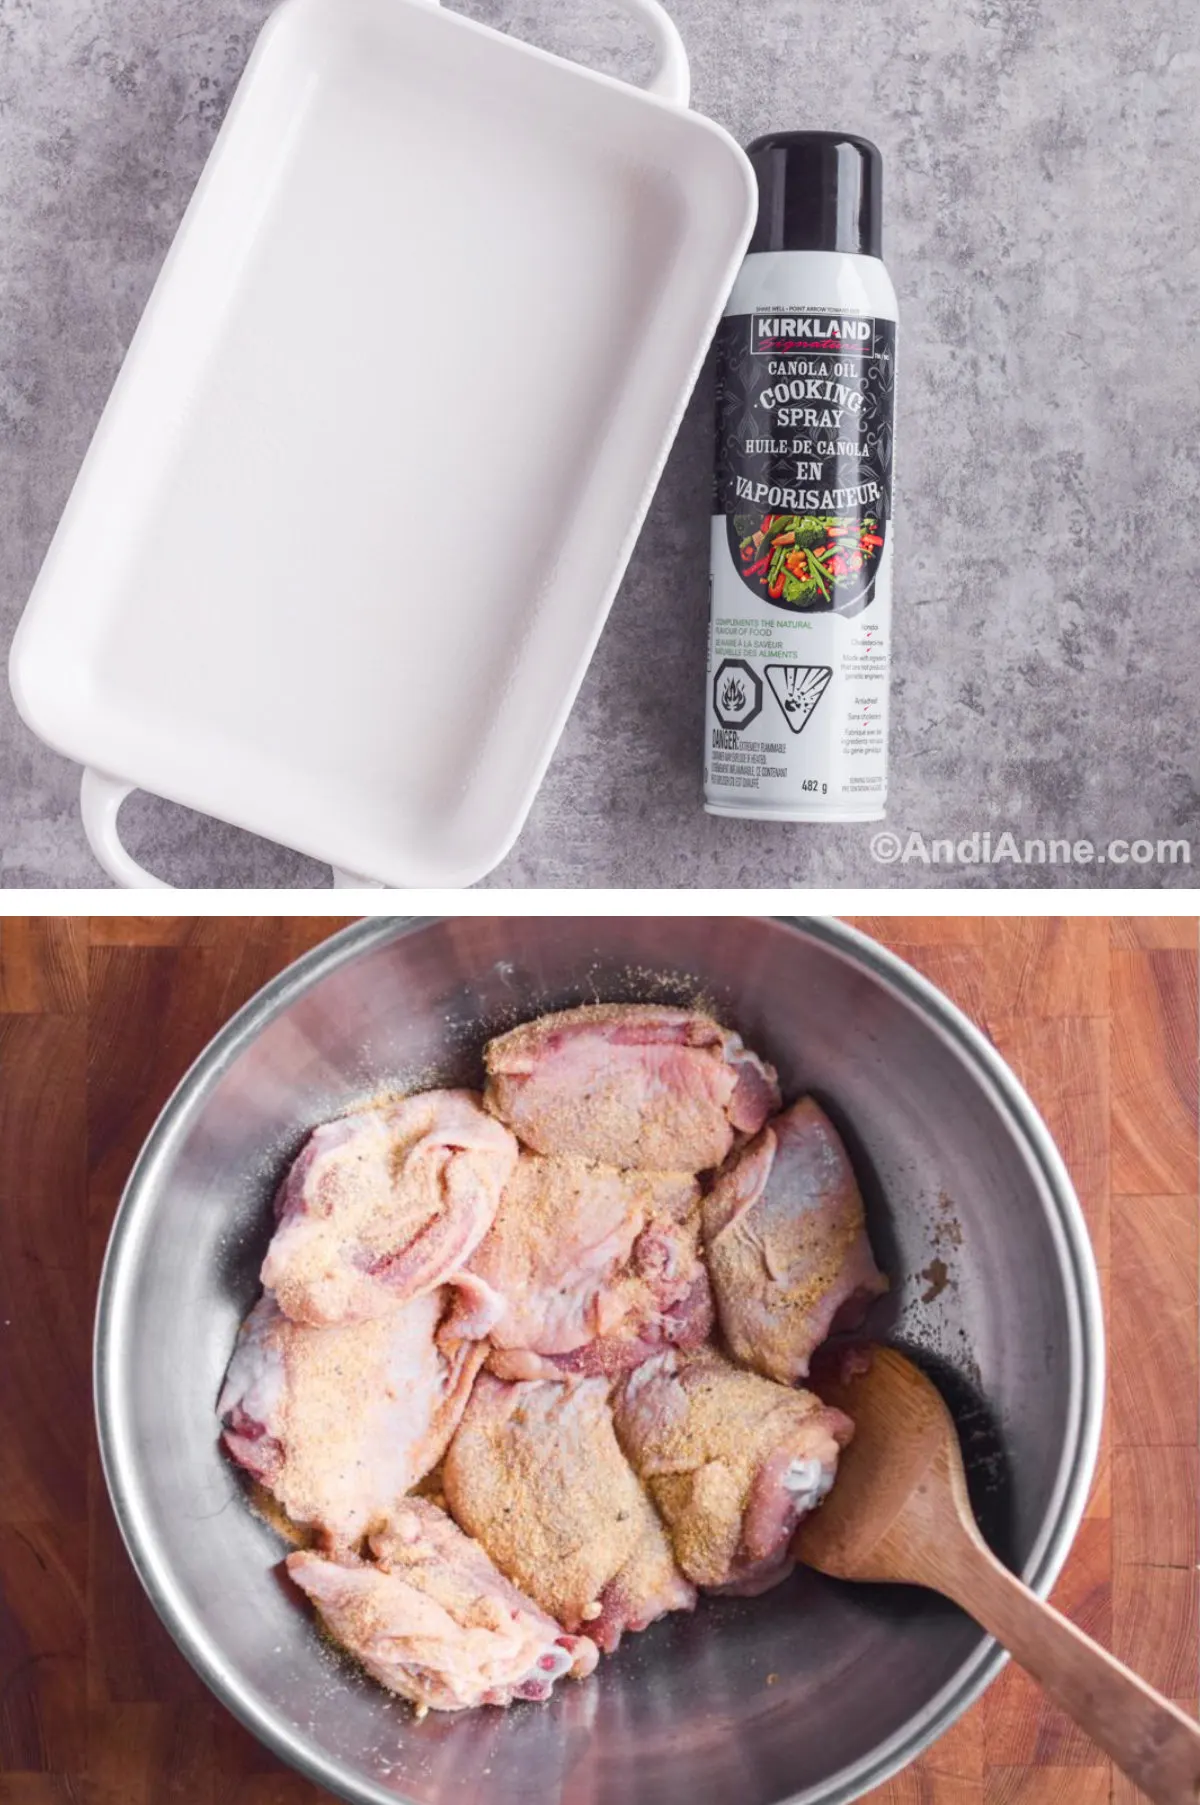 Two overhead images in one: 1. White baking dish and cooking spray. 2. Bowl of raw chicken thighs with salt and pepper in a steel bowl. 